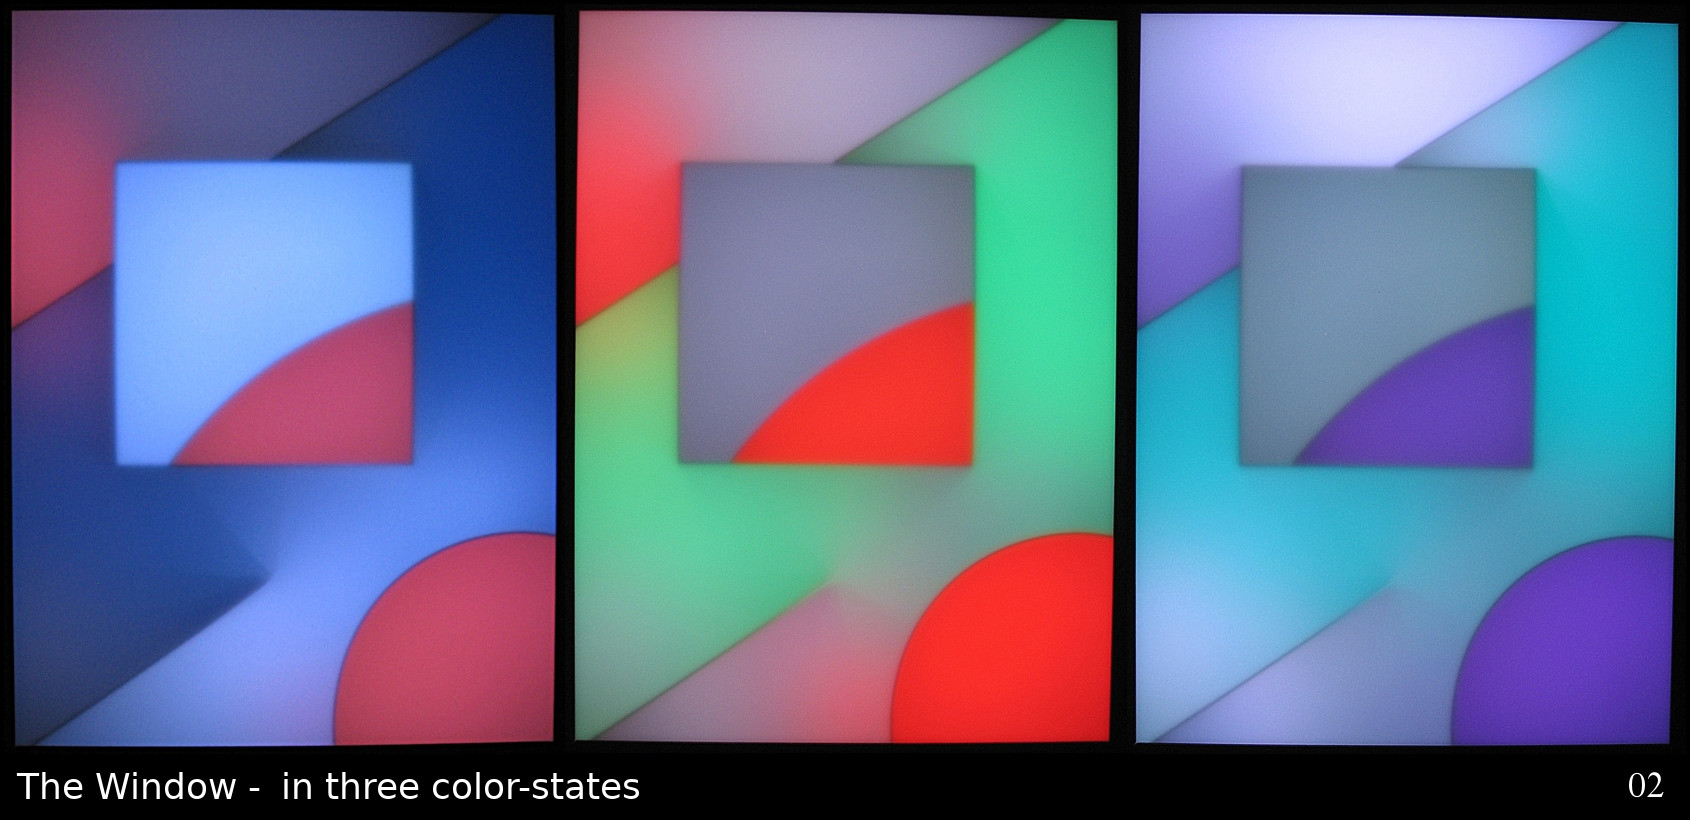 "The Window" in three color states.